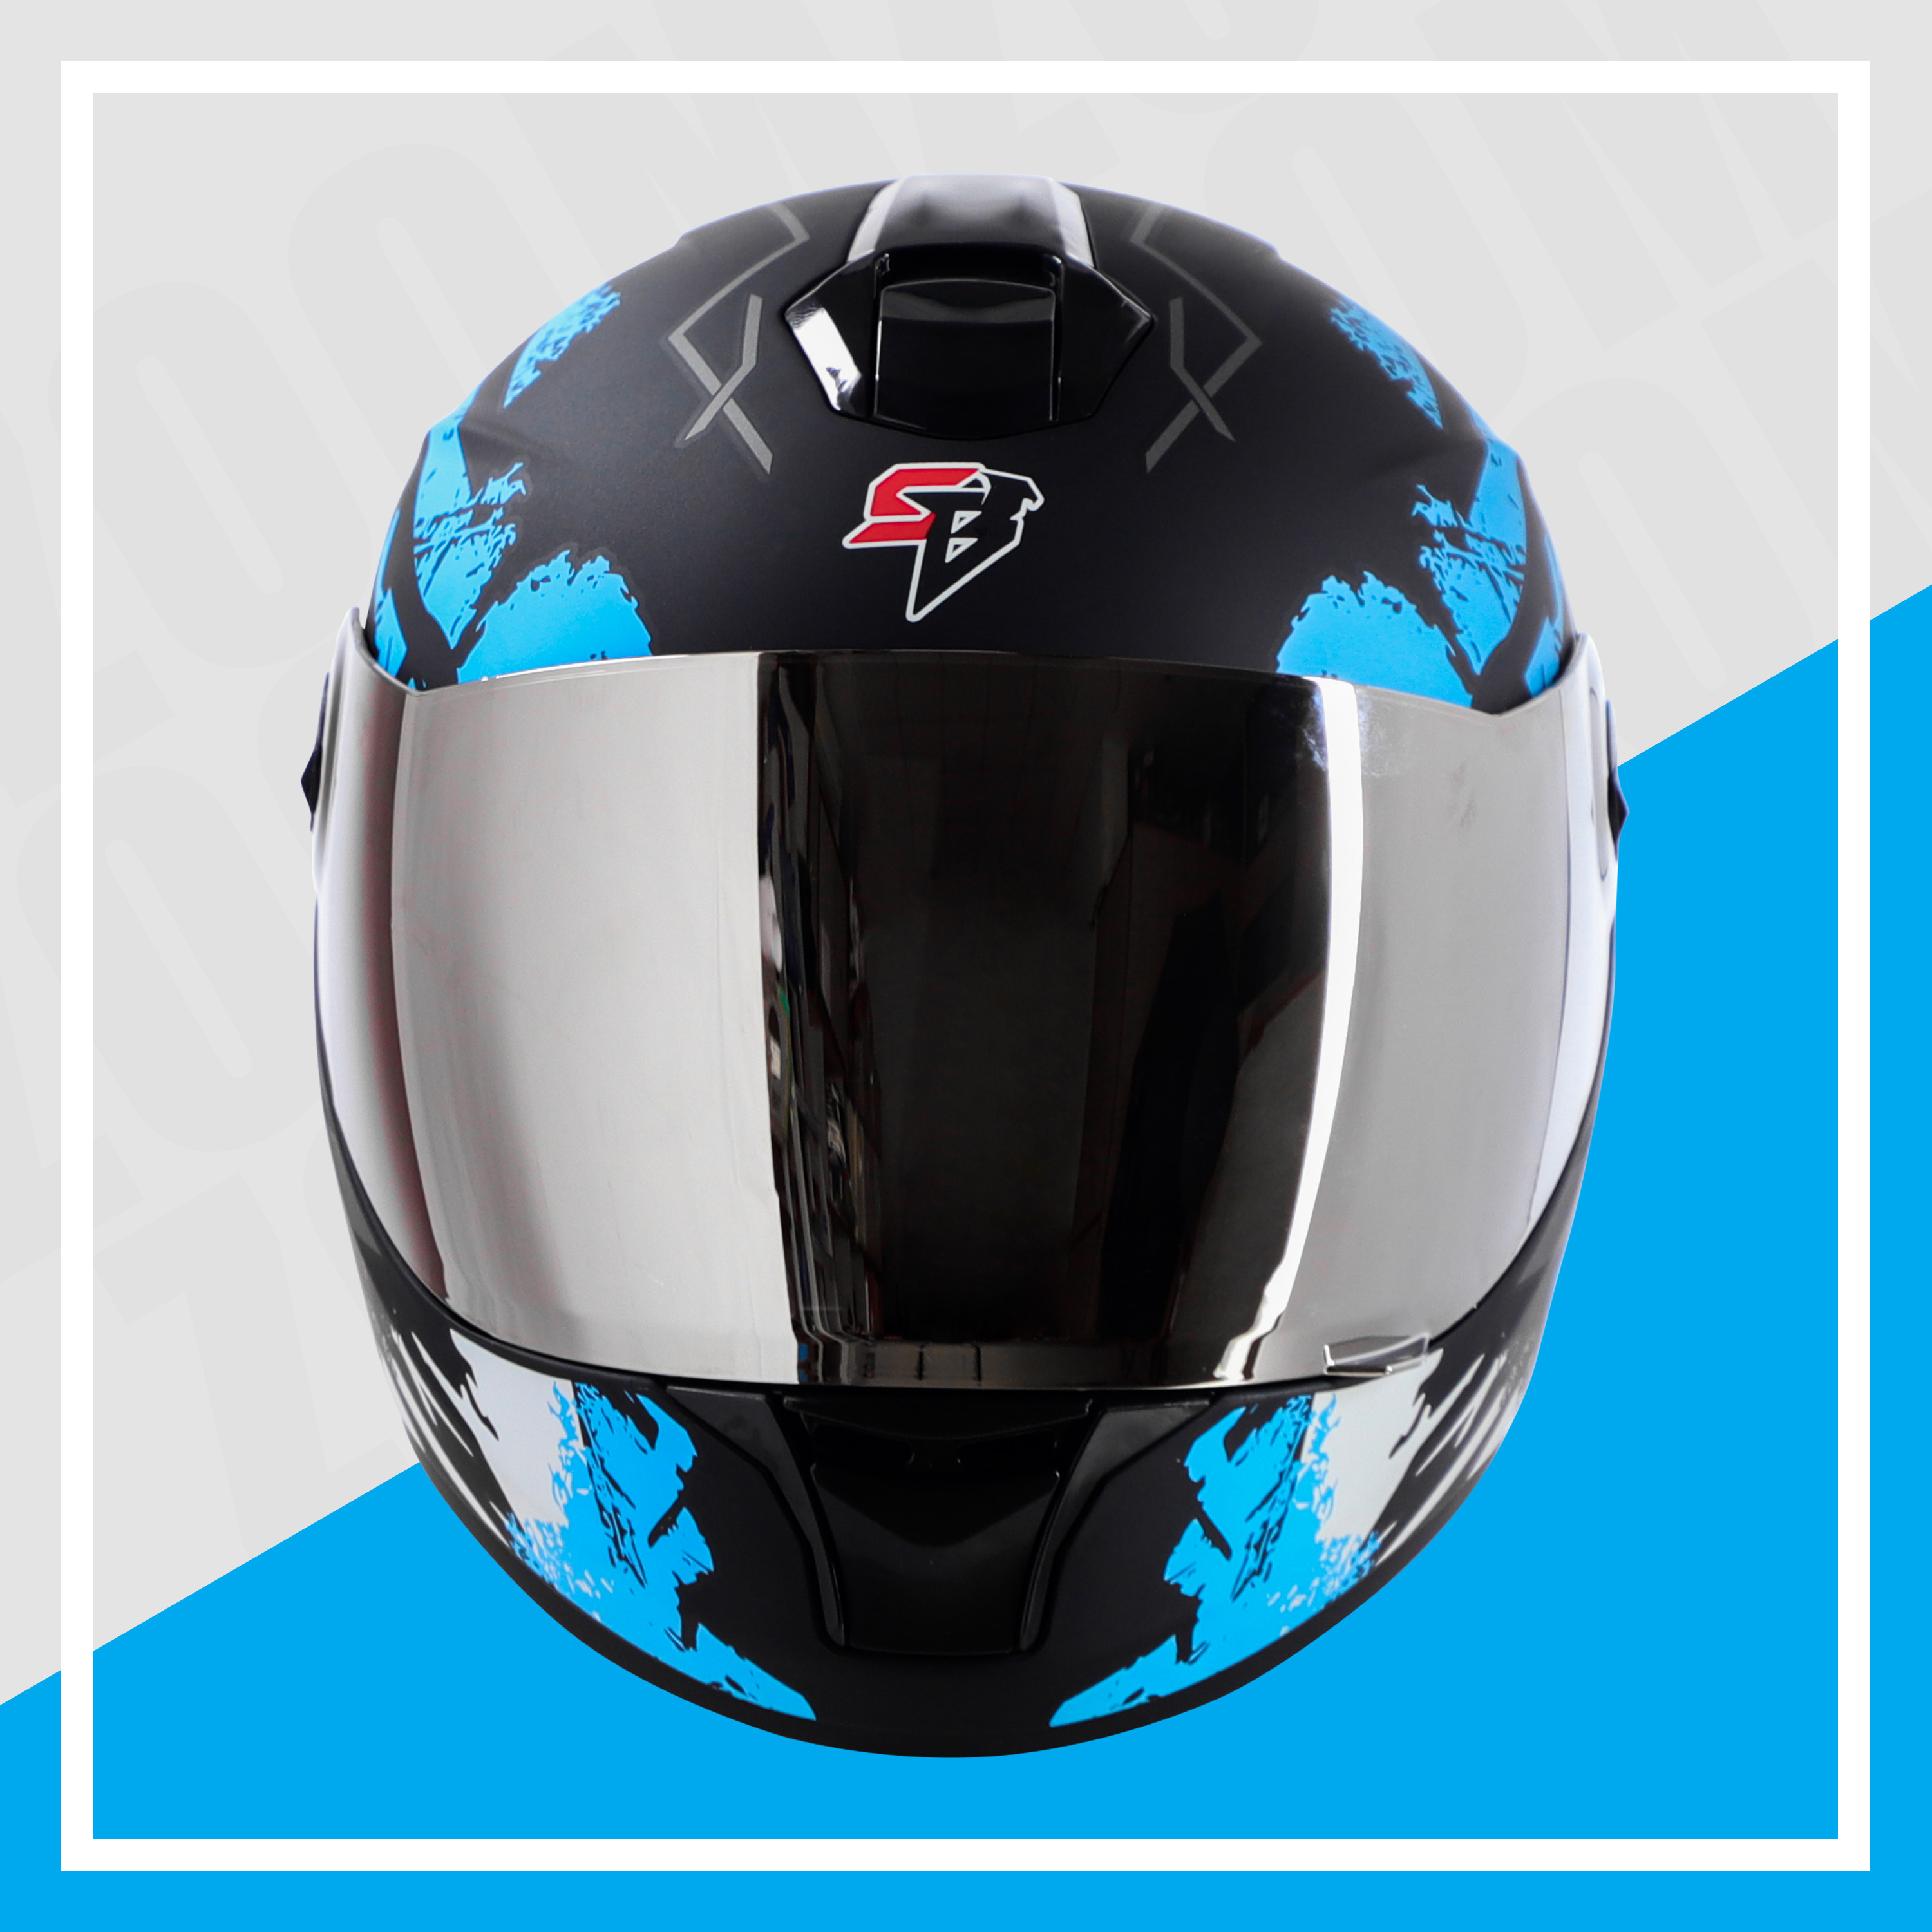 Steelbird SBH-11 Zoom Racer ISI Certified Full Face Graphic Helmet For Men And Women (Glossy Black Jazz Blue With Chrome Silver Visor)